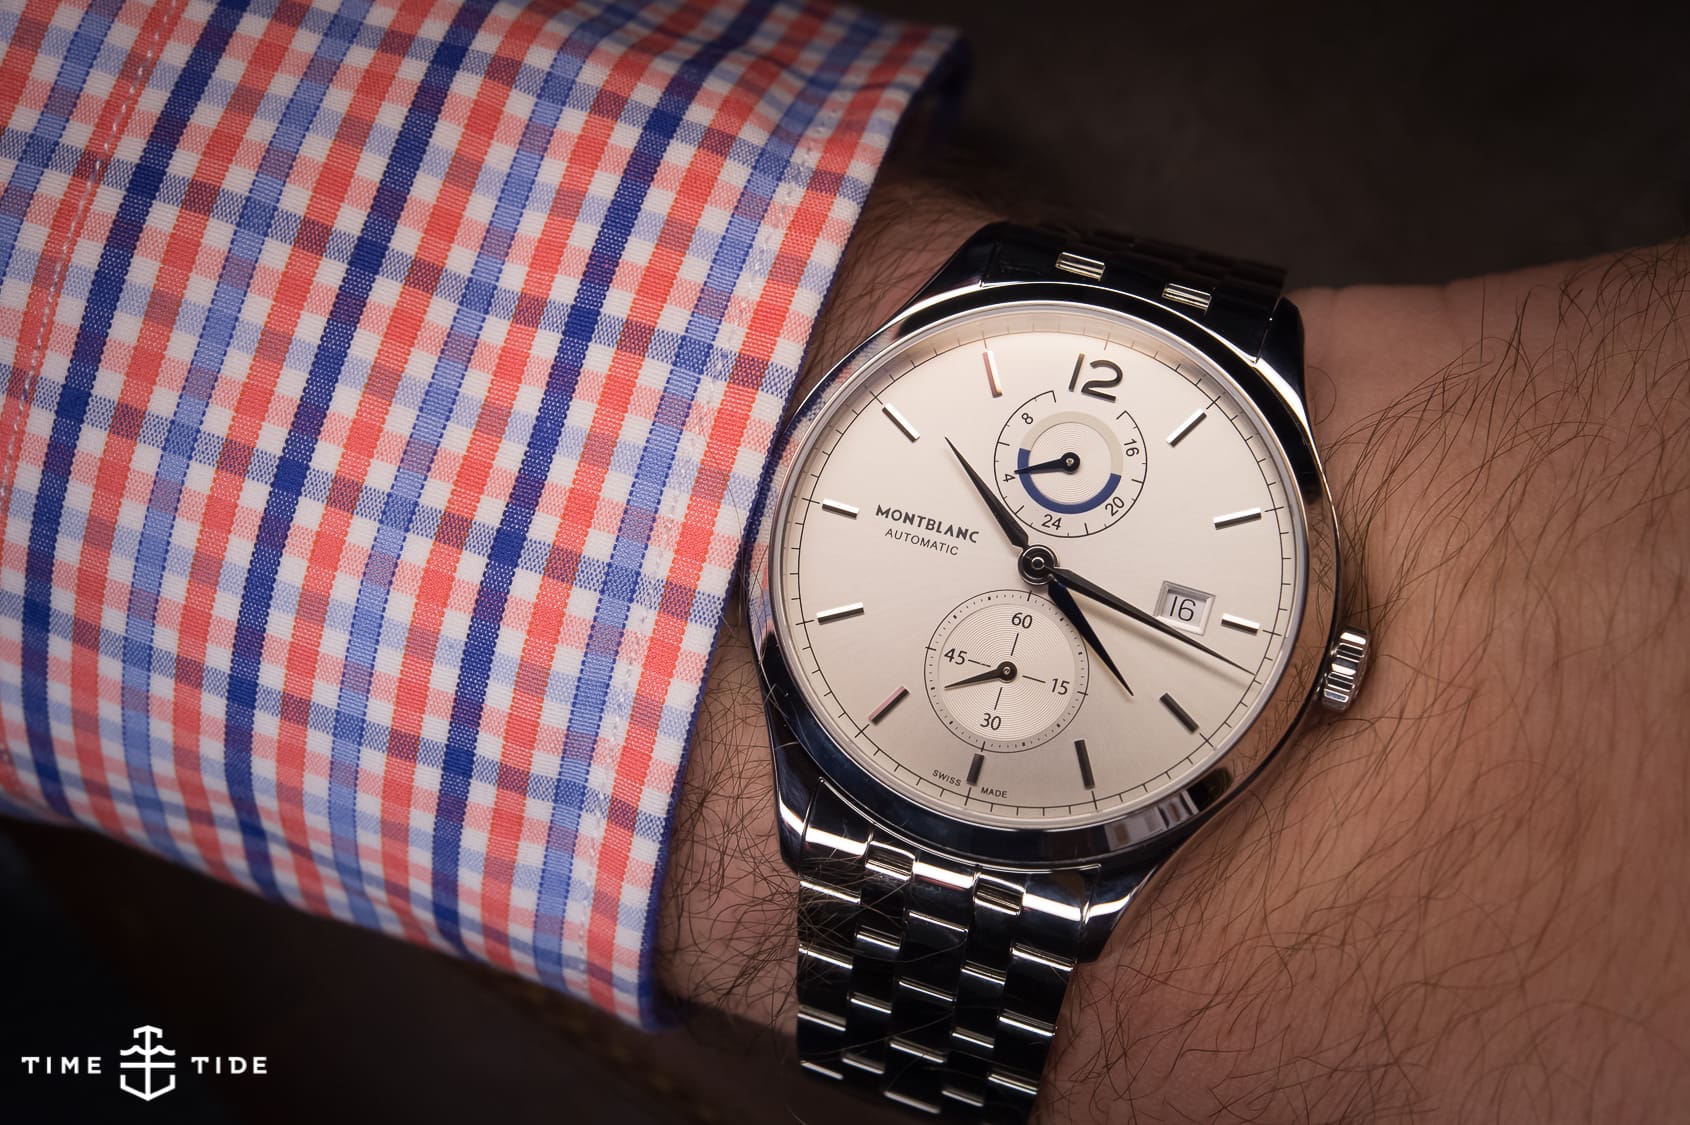 HANDS ON: With the Montblanc Heritage Chronometrie Dual Time